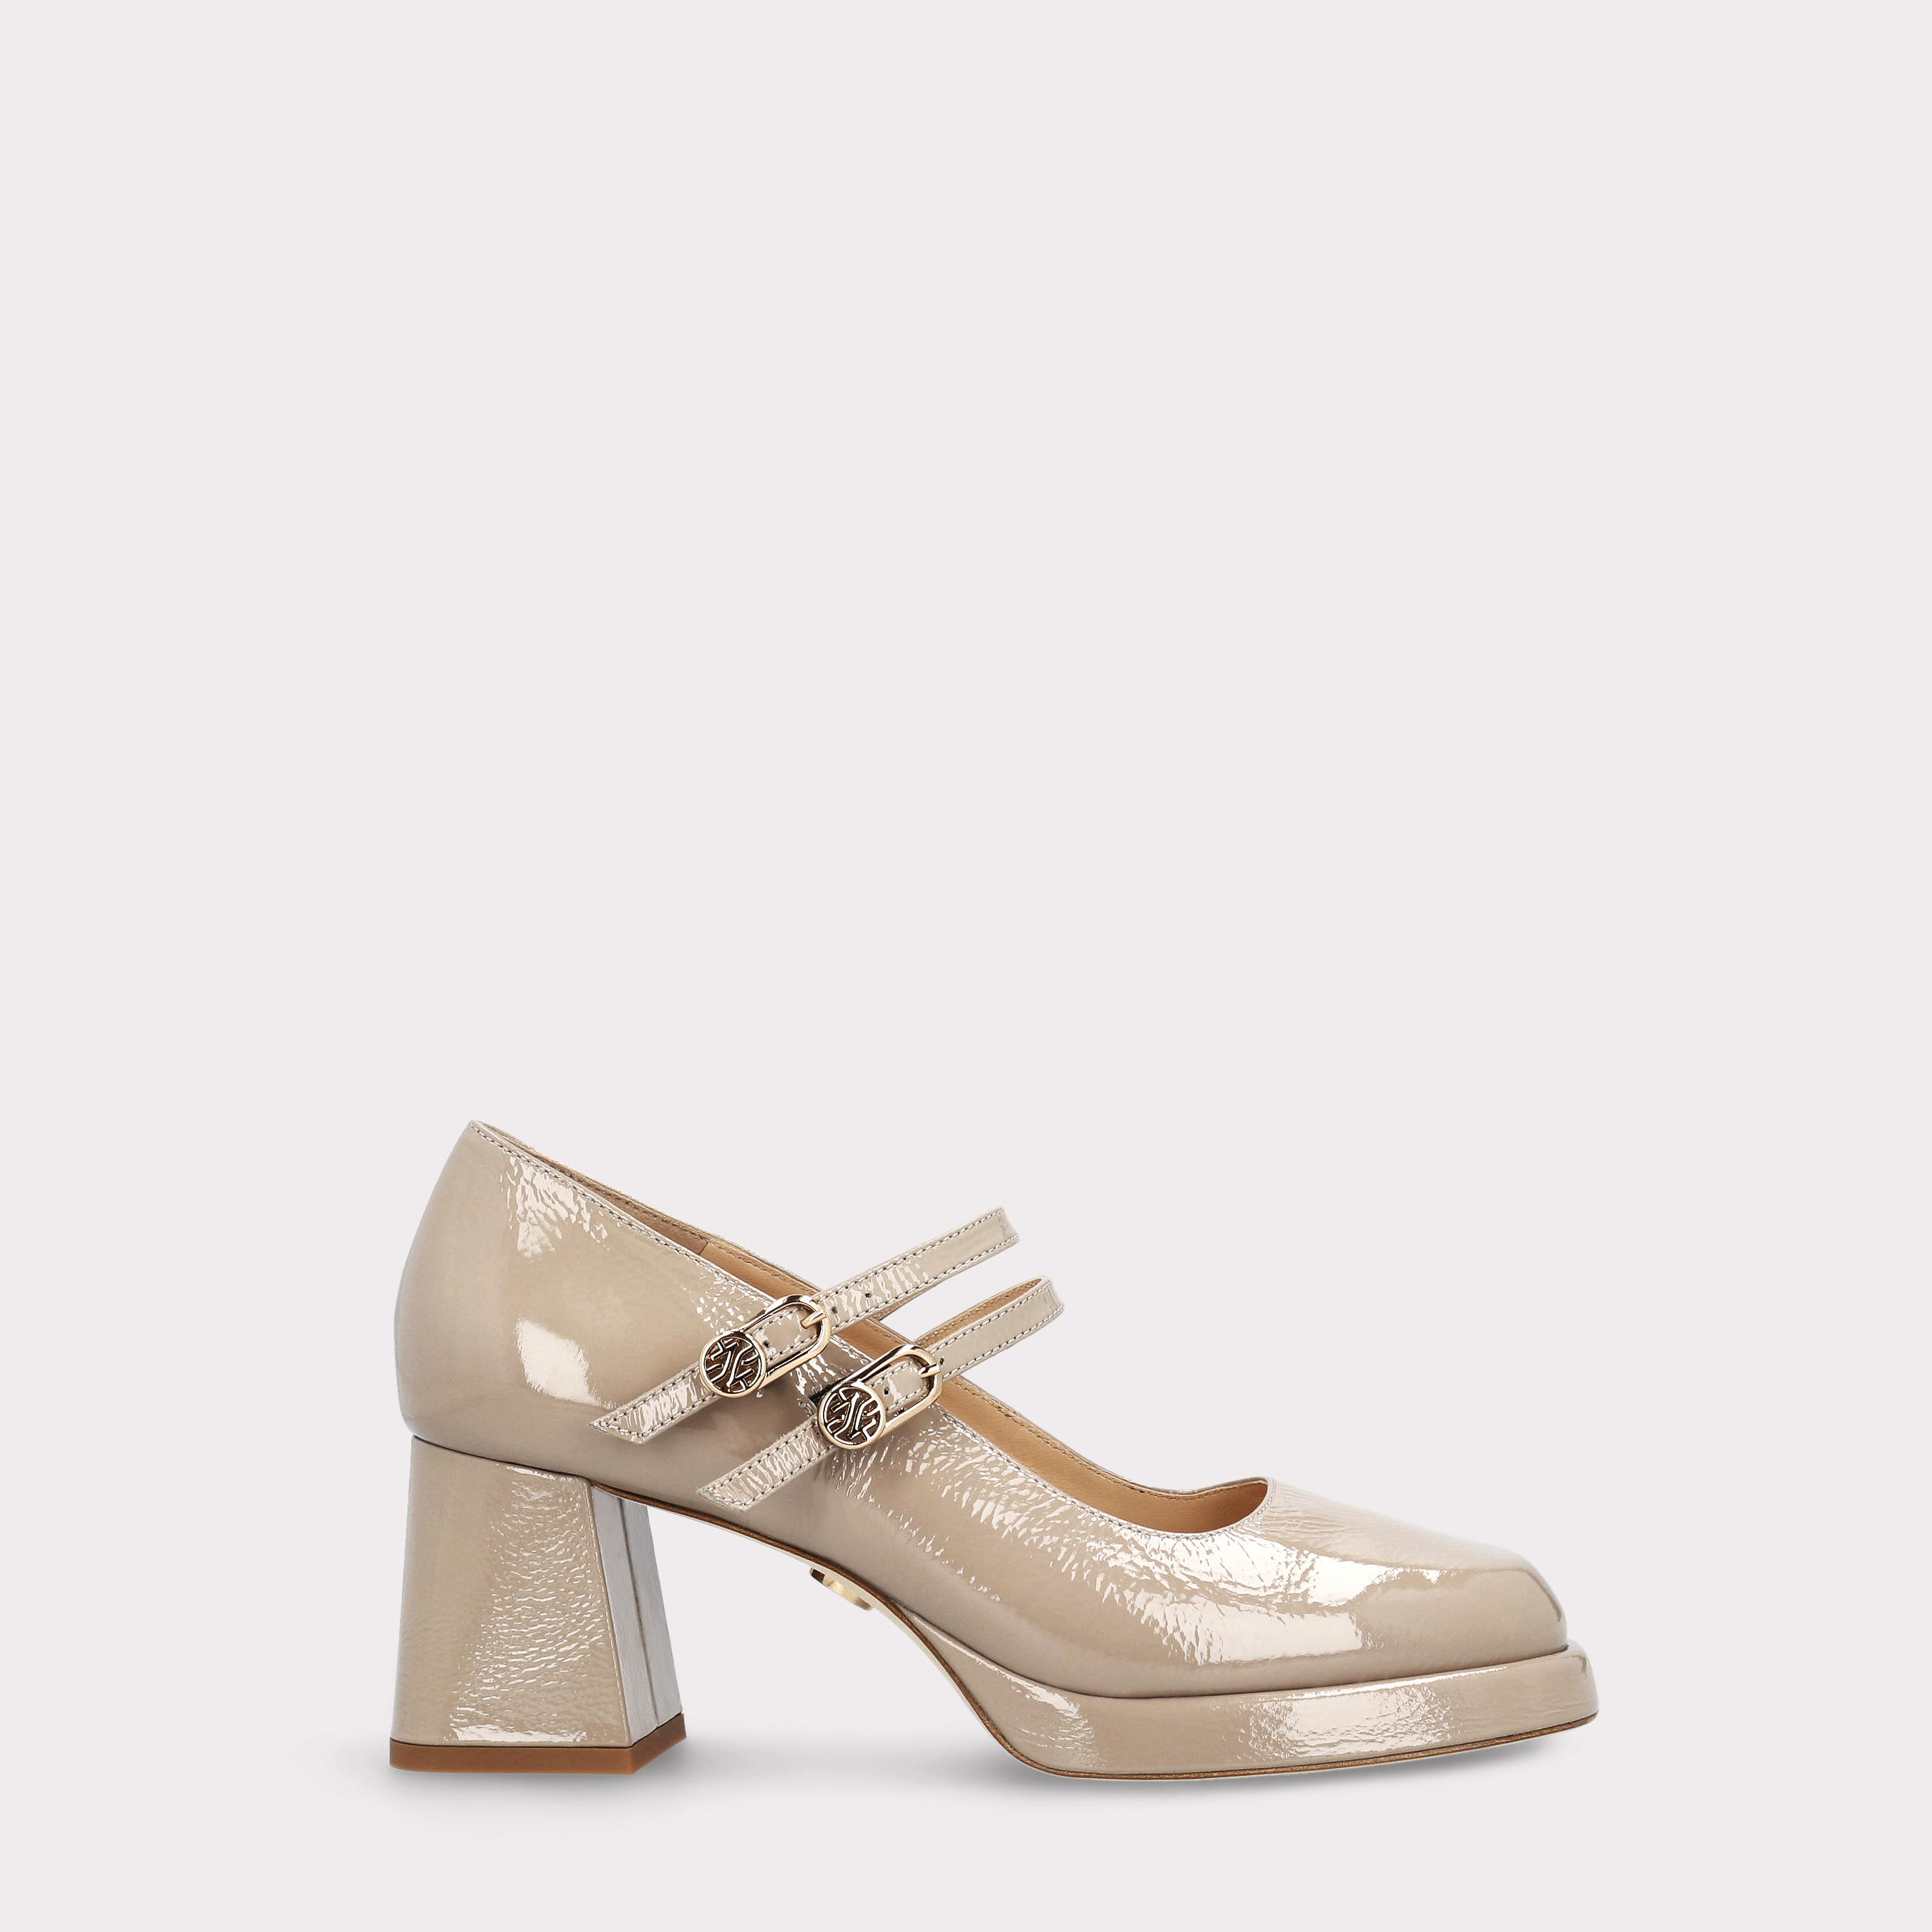 CONNIE BEBE 01 NUDE CRUSHED PATENT LEATHER PLATFORM PUMPS